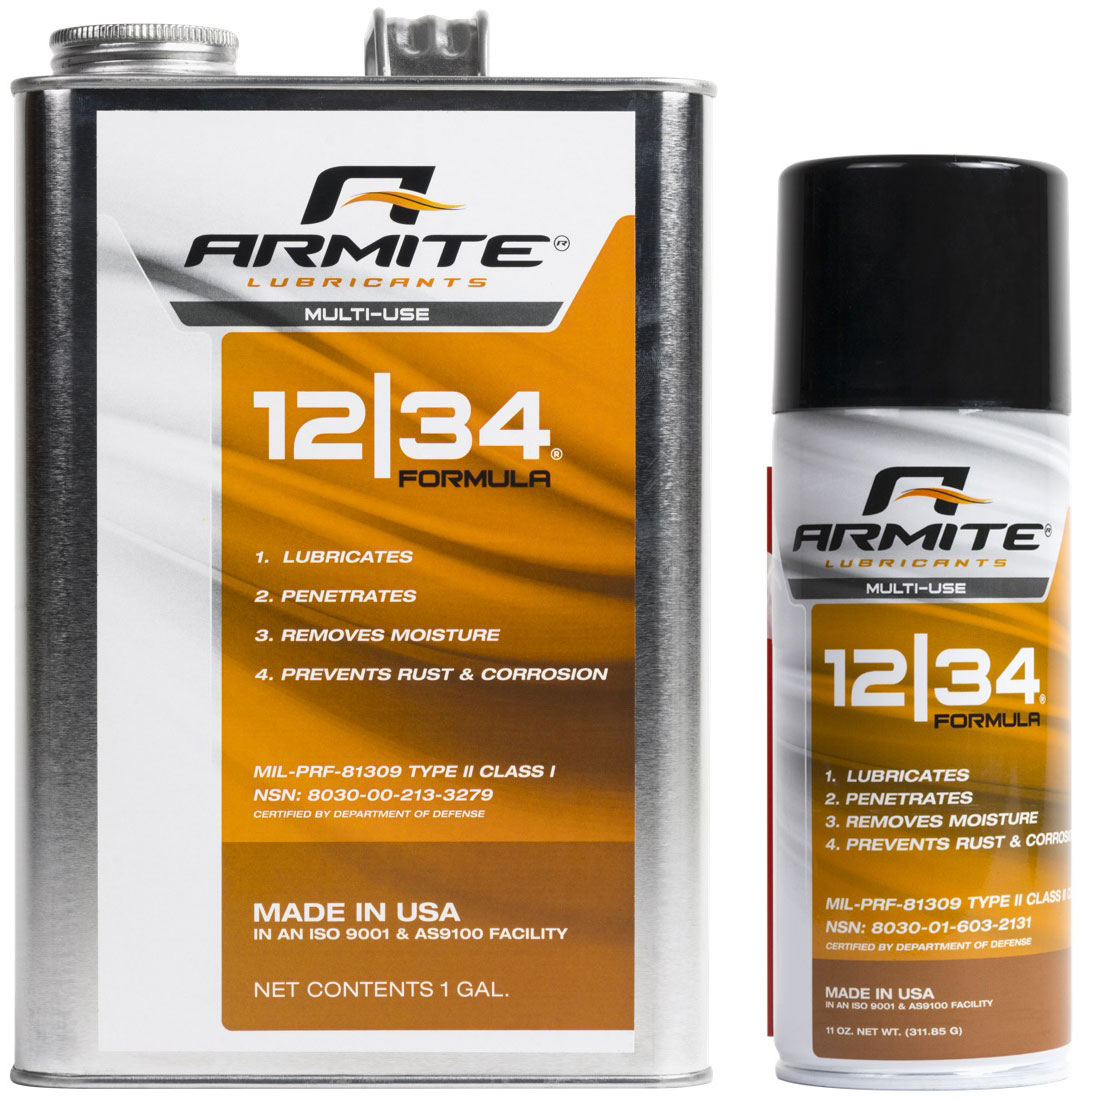 12|34® Formula – Proprietary MIL-PRF-81309H – the Best of the Best